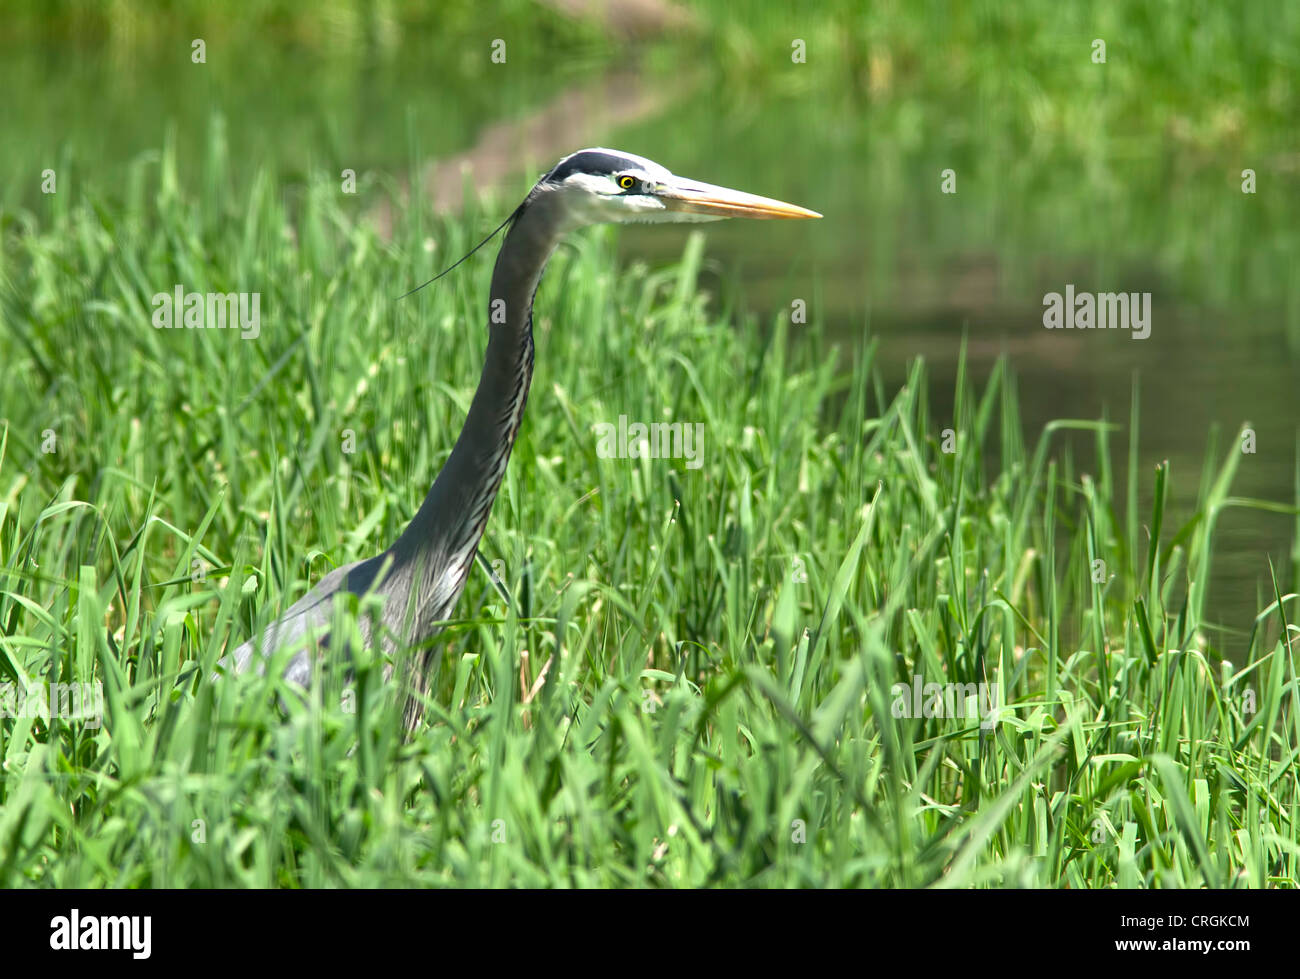 A great blue heron stands in tall green grass. Stock Photo